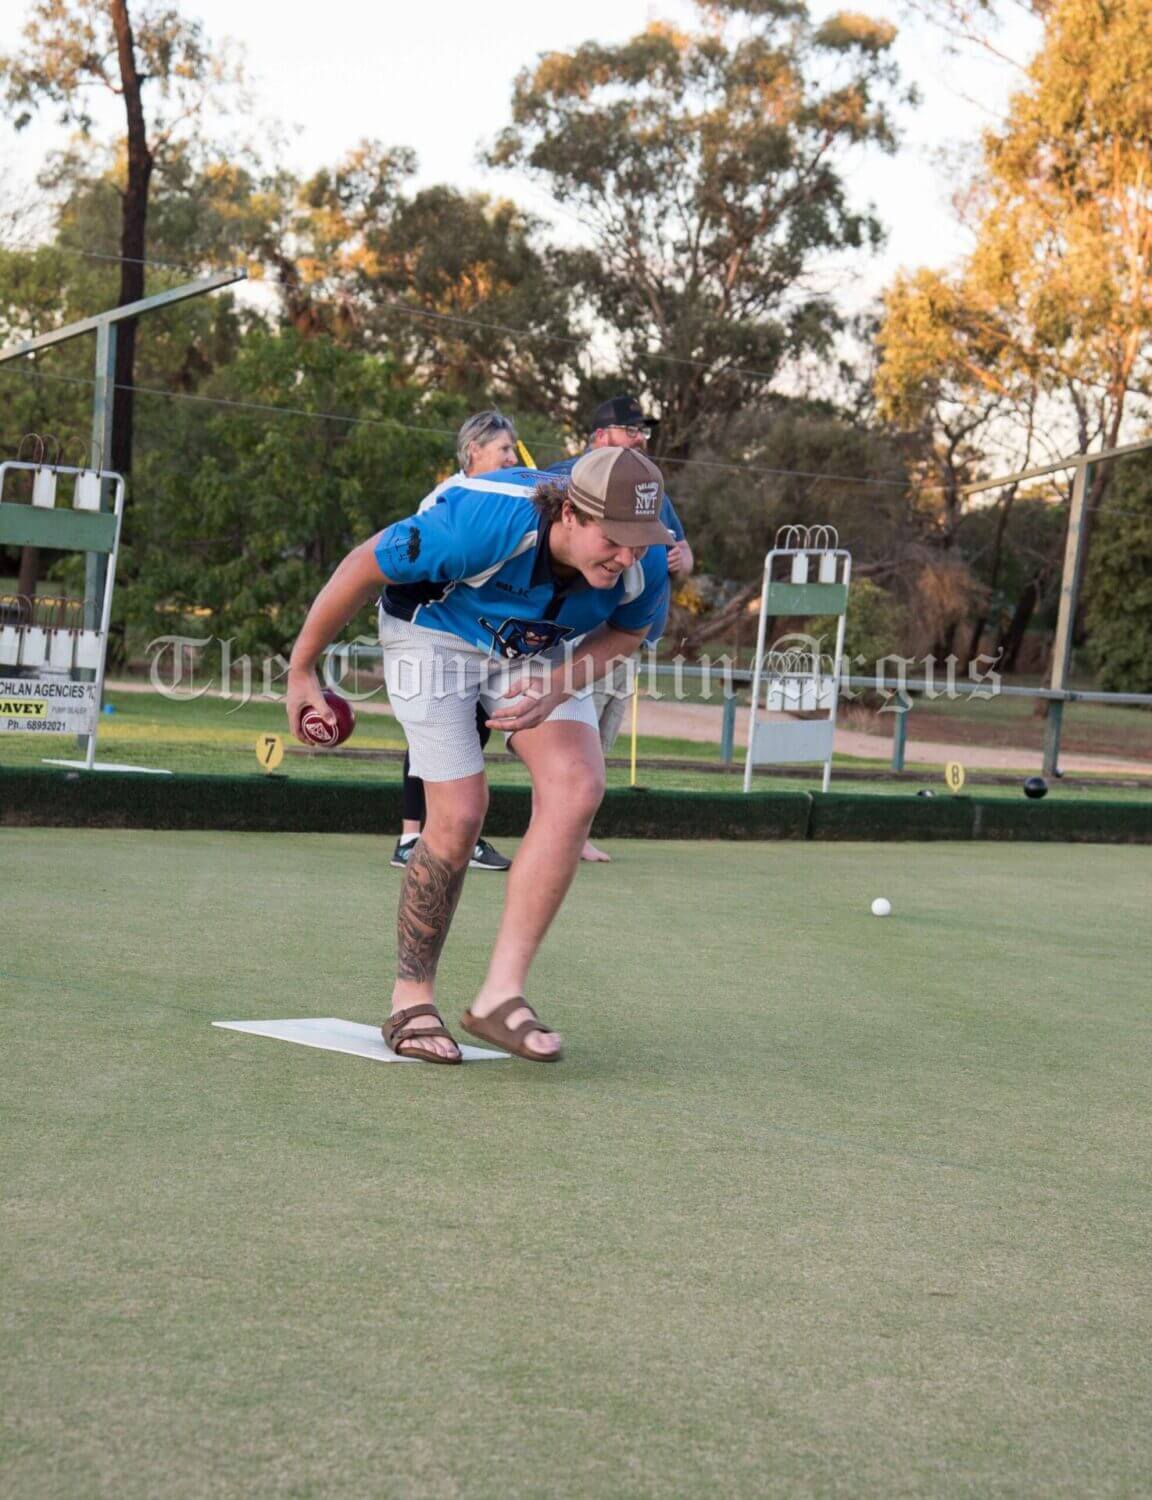 Phar Nicholson rolls one down during Business House Bowls. Image Credit: Kathy Parnaby.